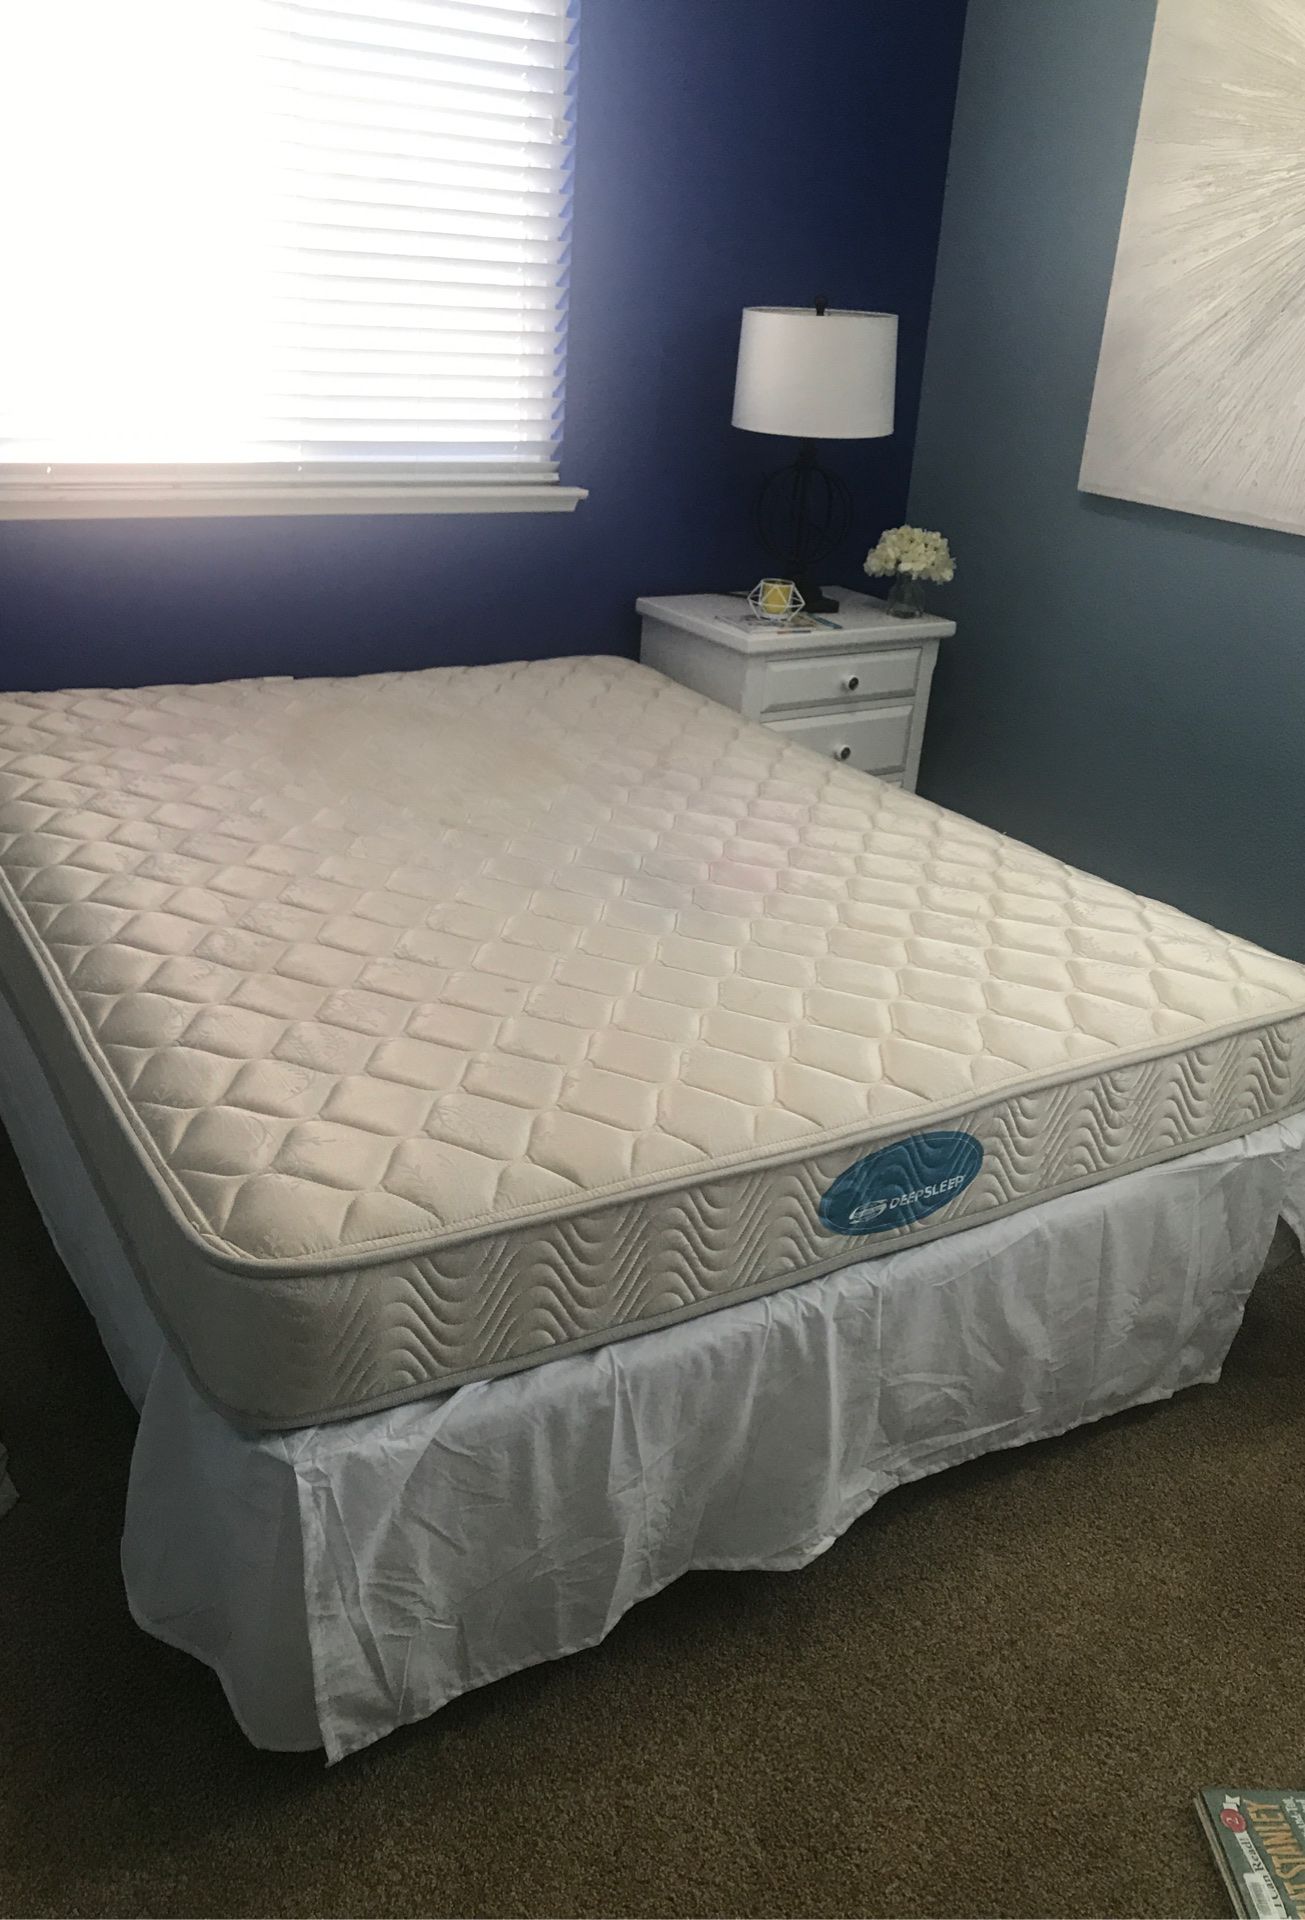 Queen mattress with box spring and metal bed frame